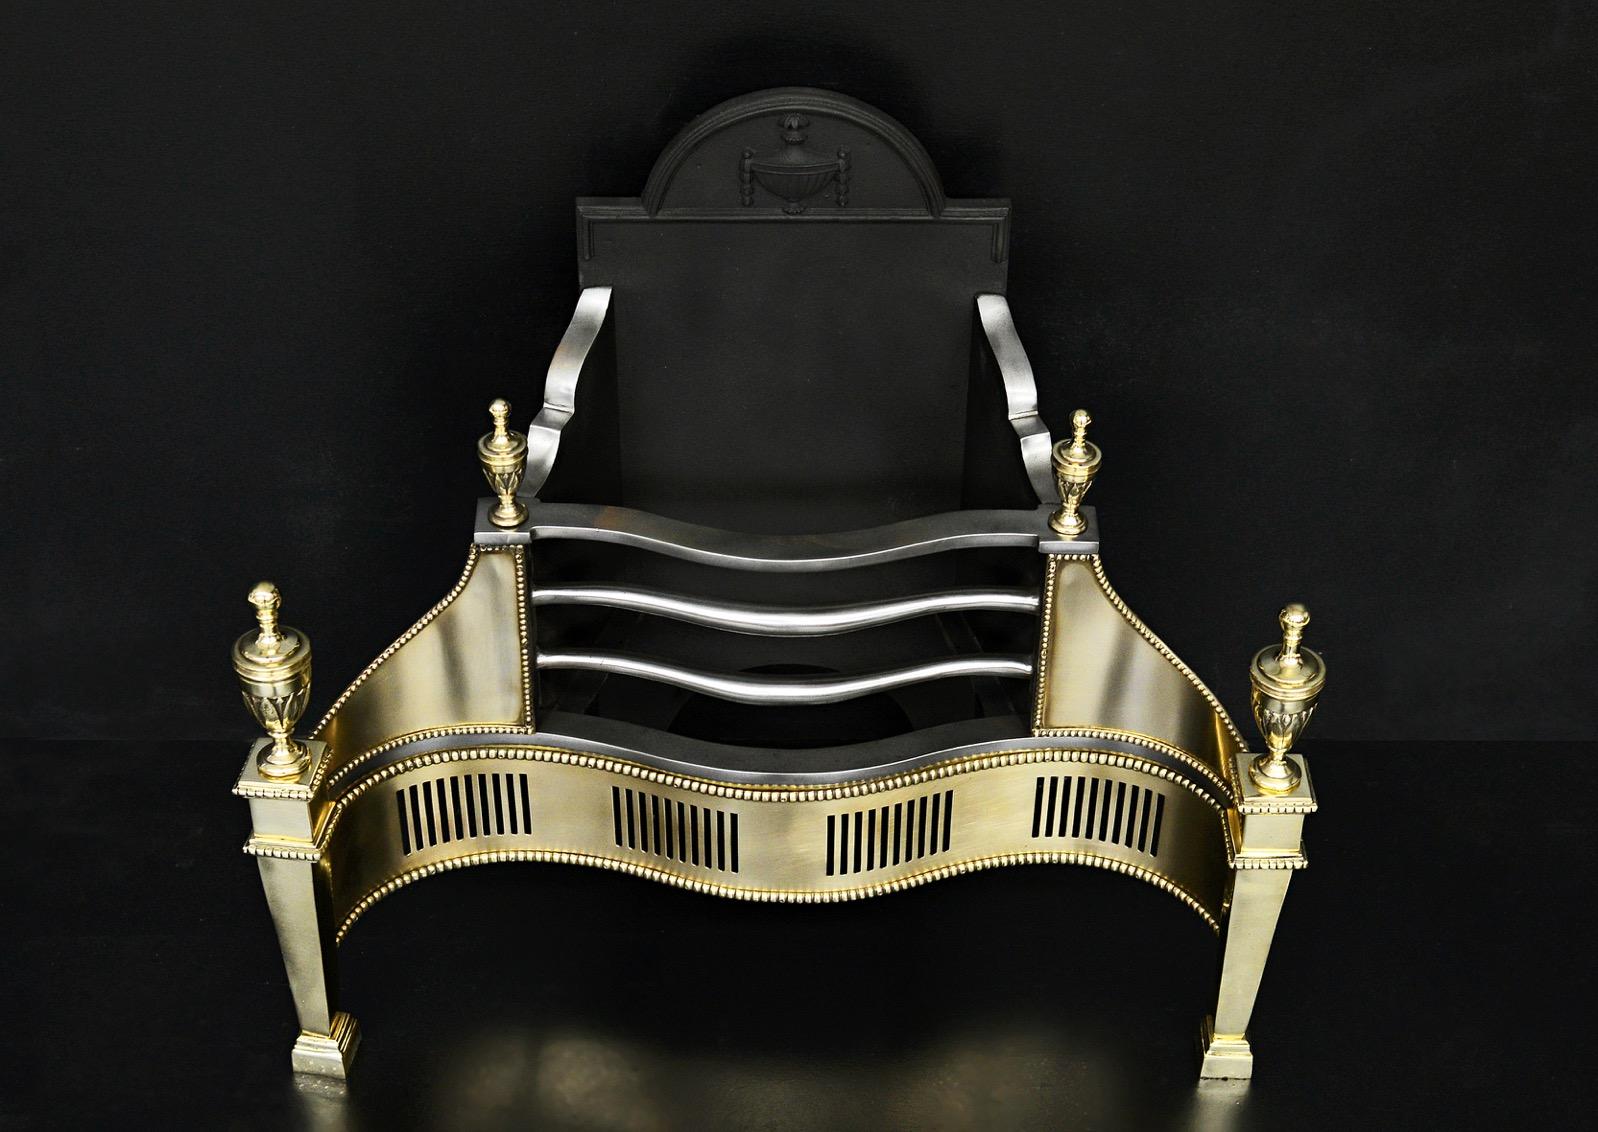 A polished brass firegrate in the Georgian manner. The serpentine, pierced fret with beading above and below surmounted by polished steel bars with and urn finials. The tapering legs with larger matching urn finials above. Decorative cast iron back